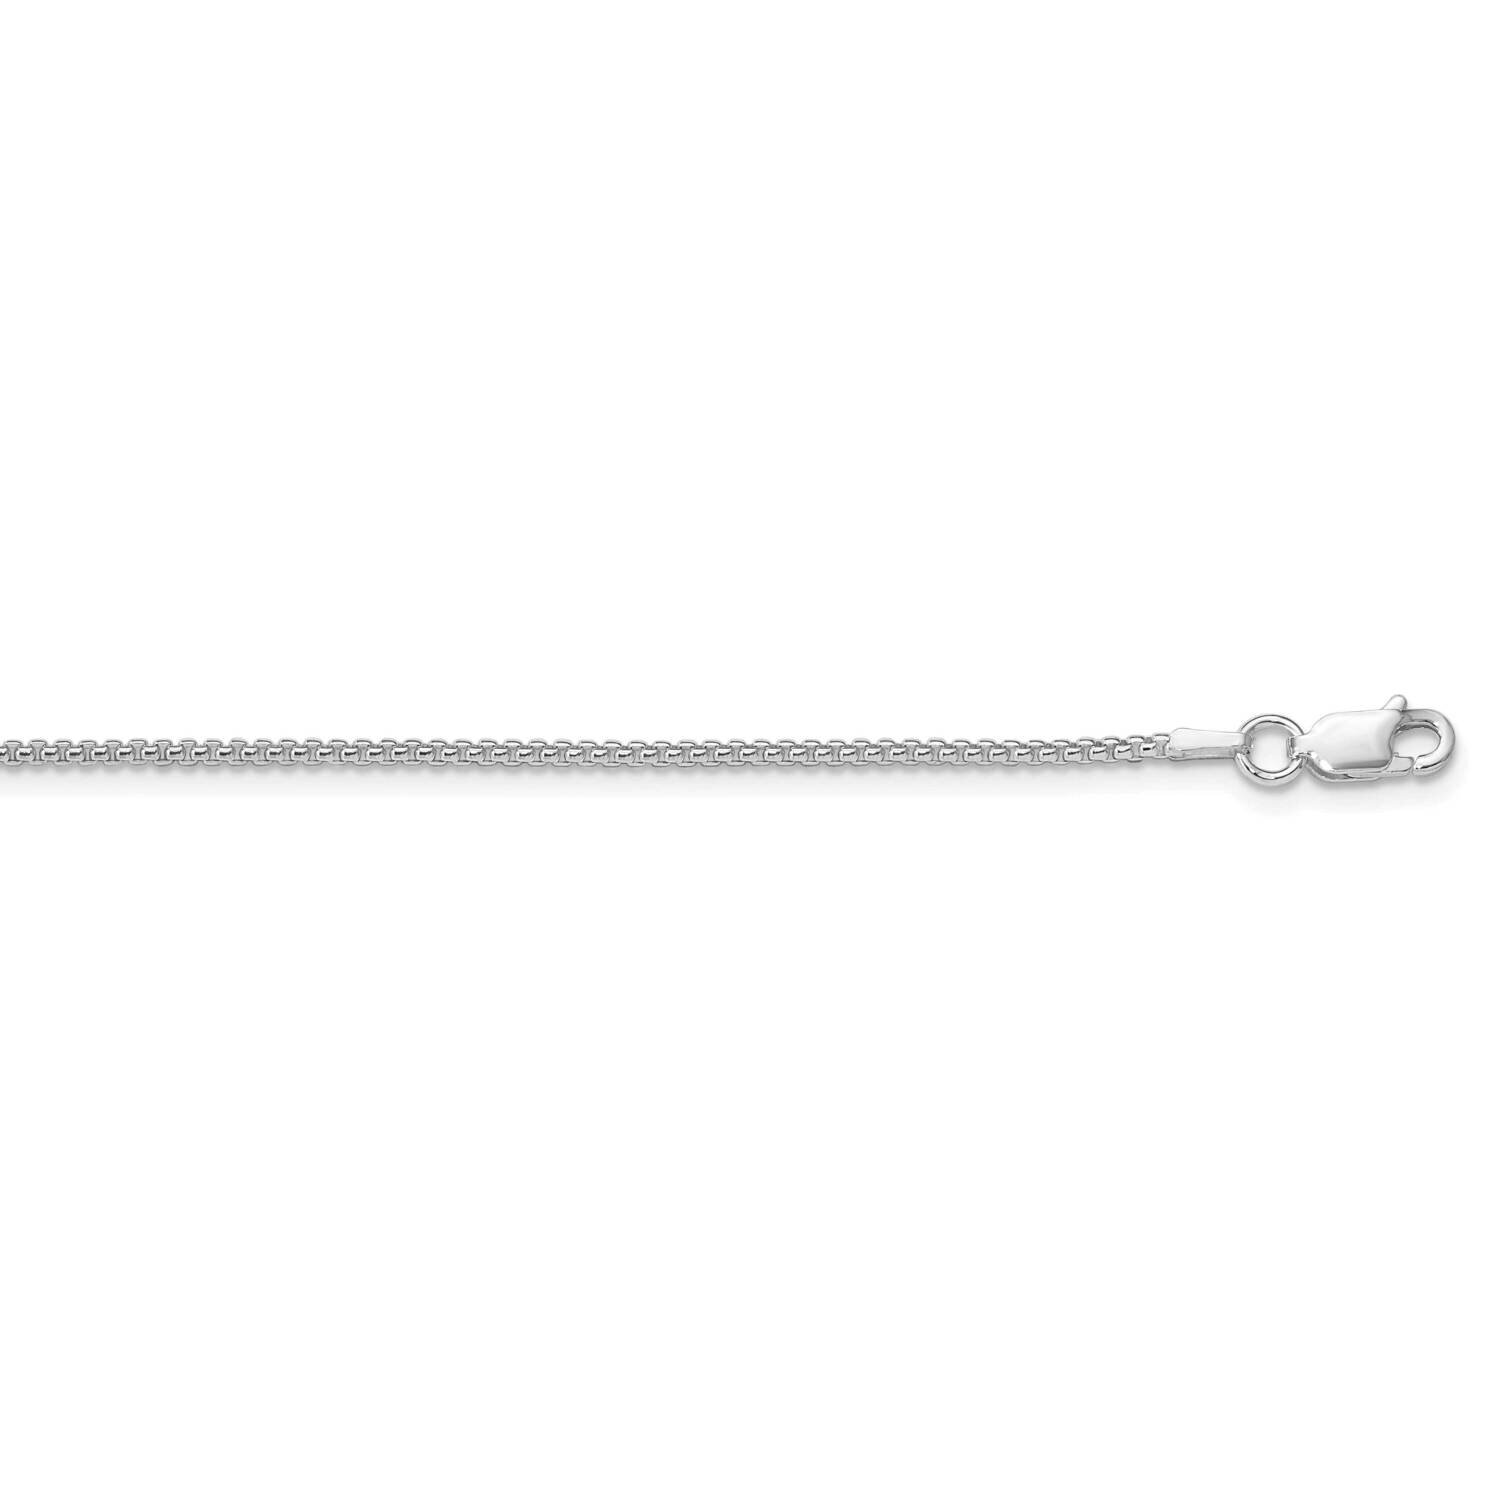 1.5mm Round Box Chain 18 Inch Sterling Silver Rhodium-Plated QHX028R-18